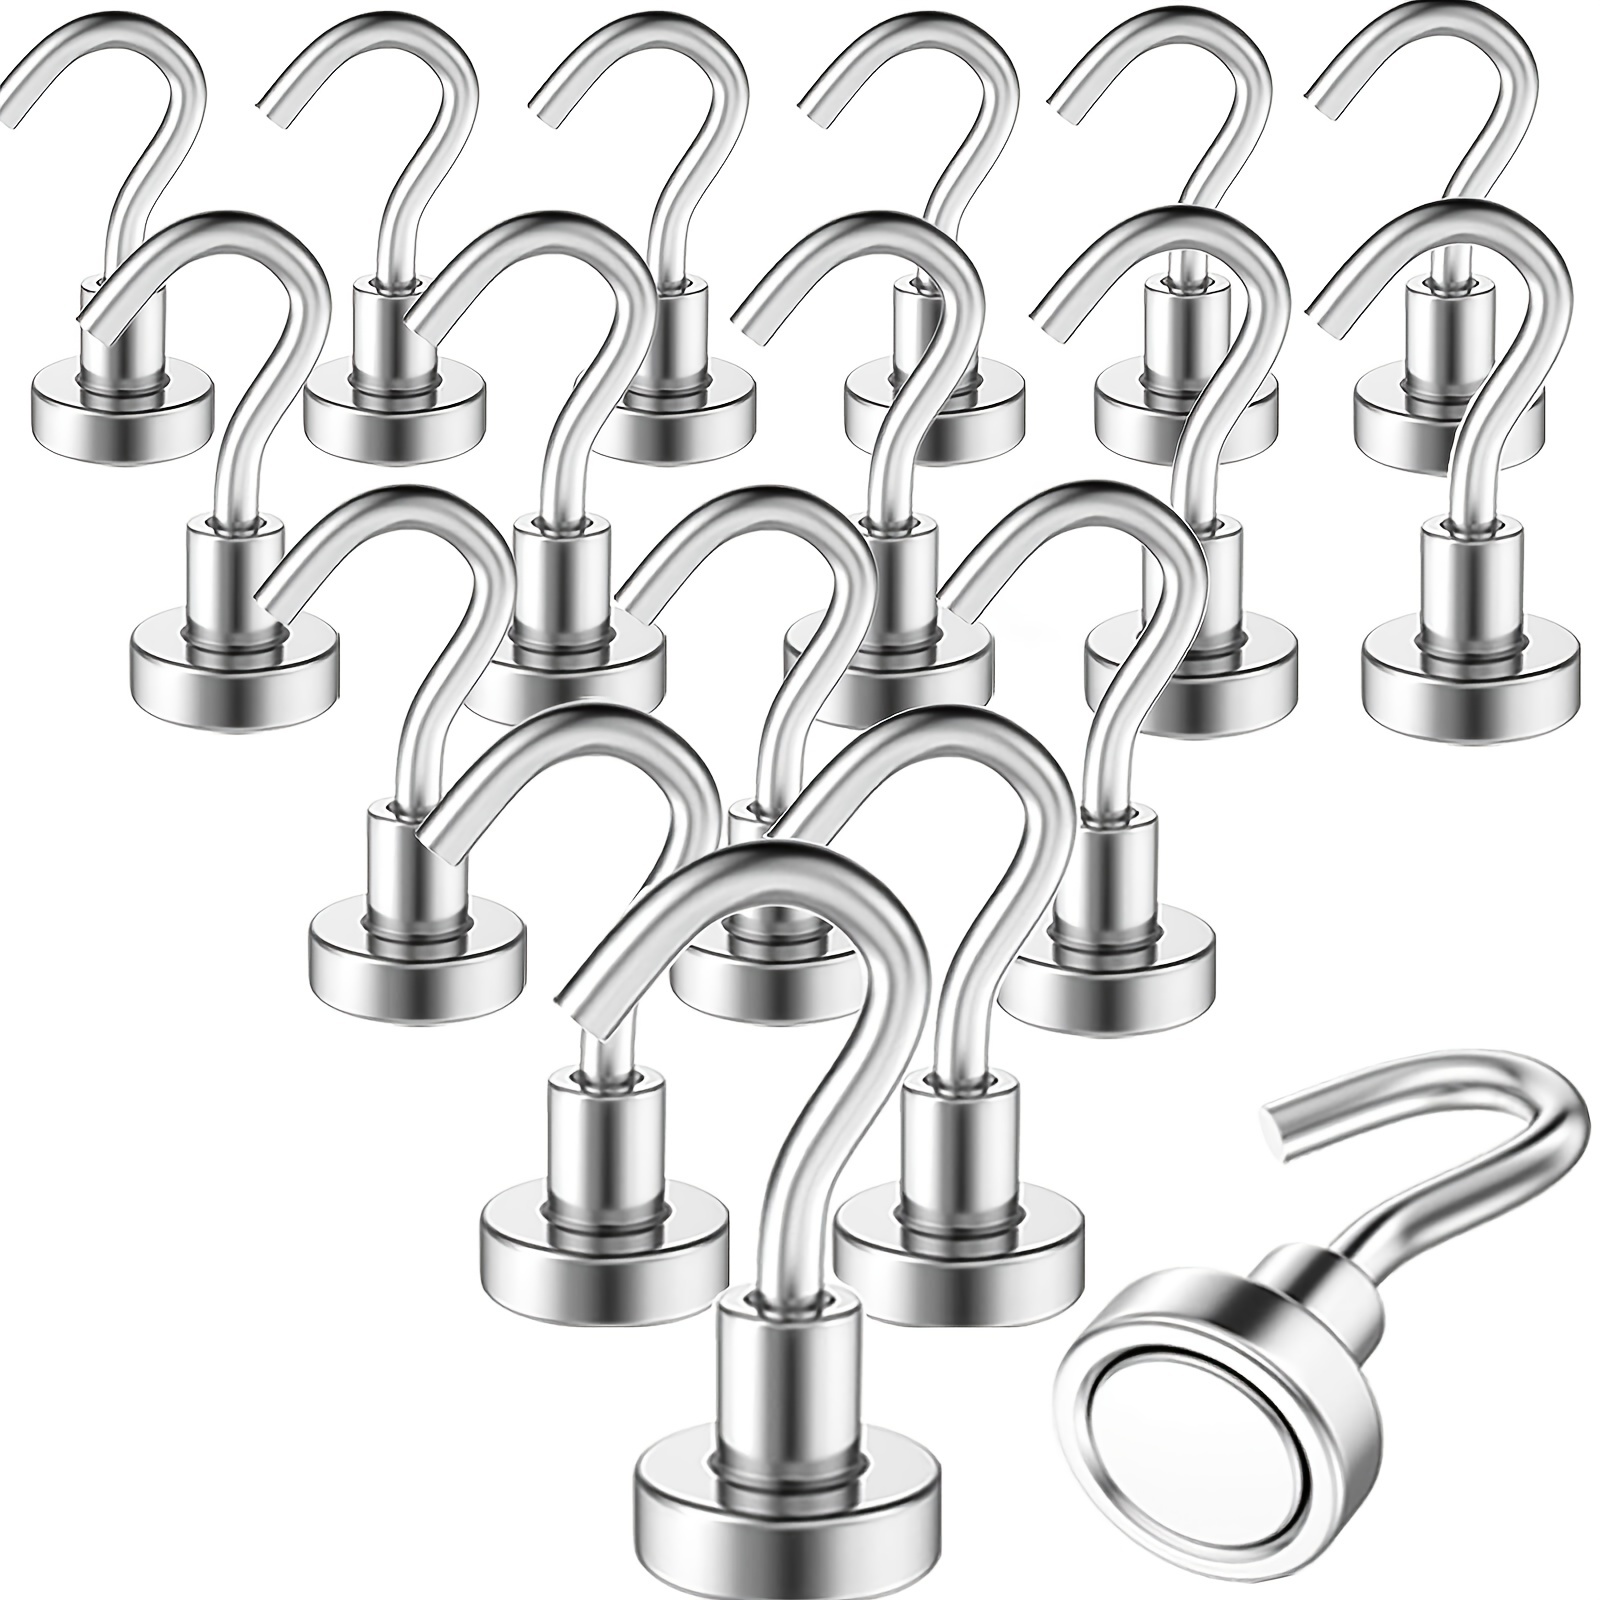 18pack Neodymium Magnetic Hooks 25lbs Heavy Duty for Cruise Camping Grill Fridge Garage Wall